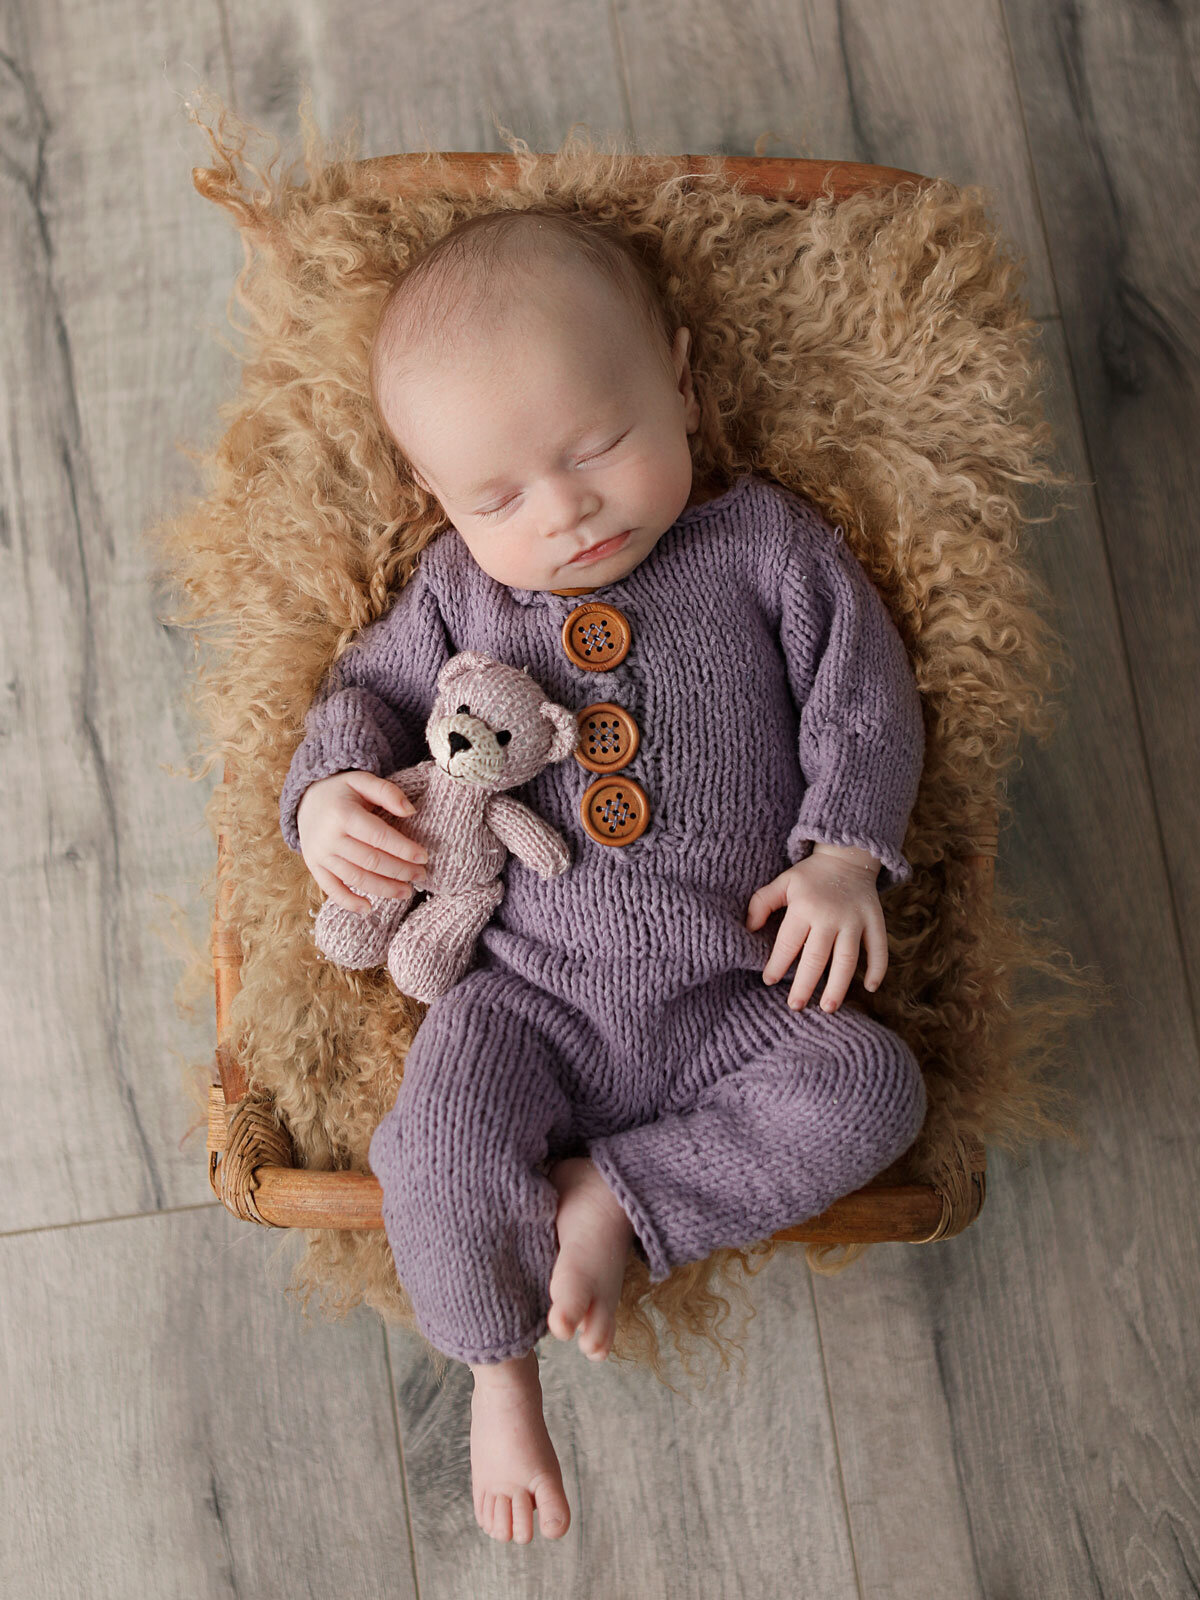 four-weeks-old-baby-girl-dressed-in-a-purple-romper-and-holding-her-teddy-bear-fast-asleep-in-her-little-bed-for-her-newborn-shoot